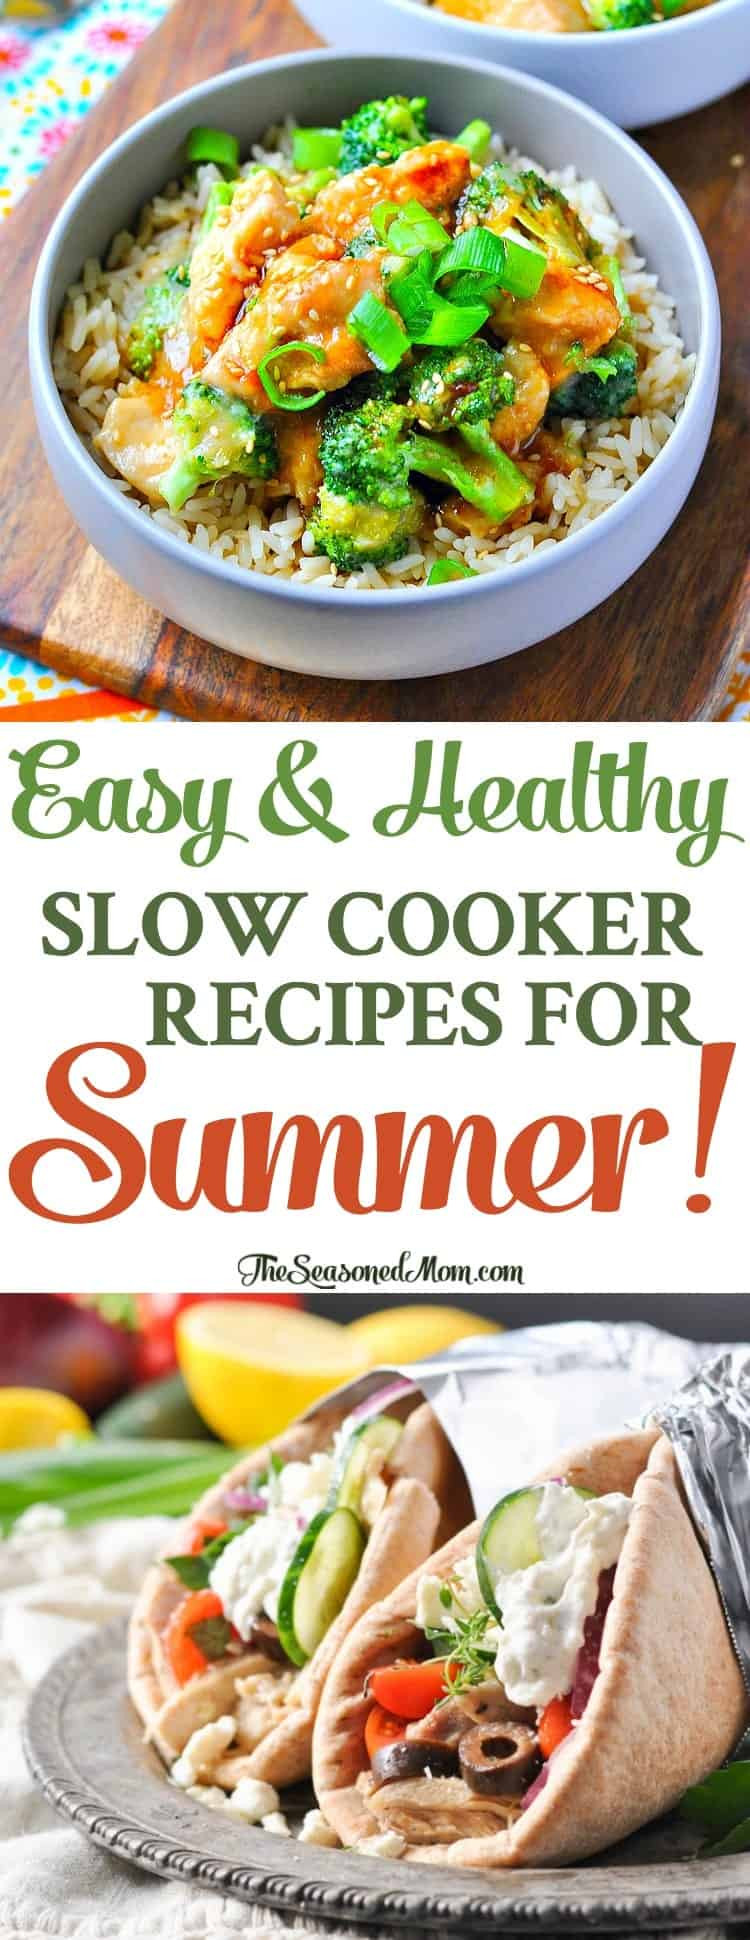 Simple Healthy Slow Cooker Recipes
 Easy Healthy Slow Cooker Recipes for Summer The